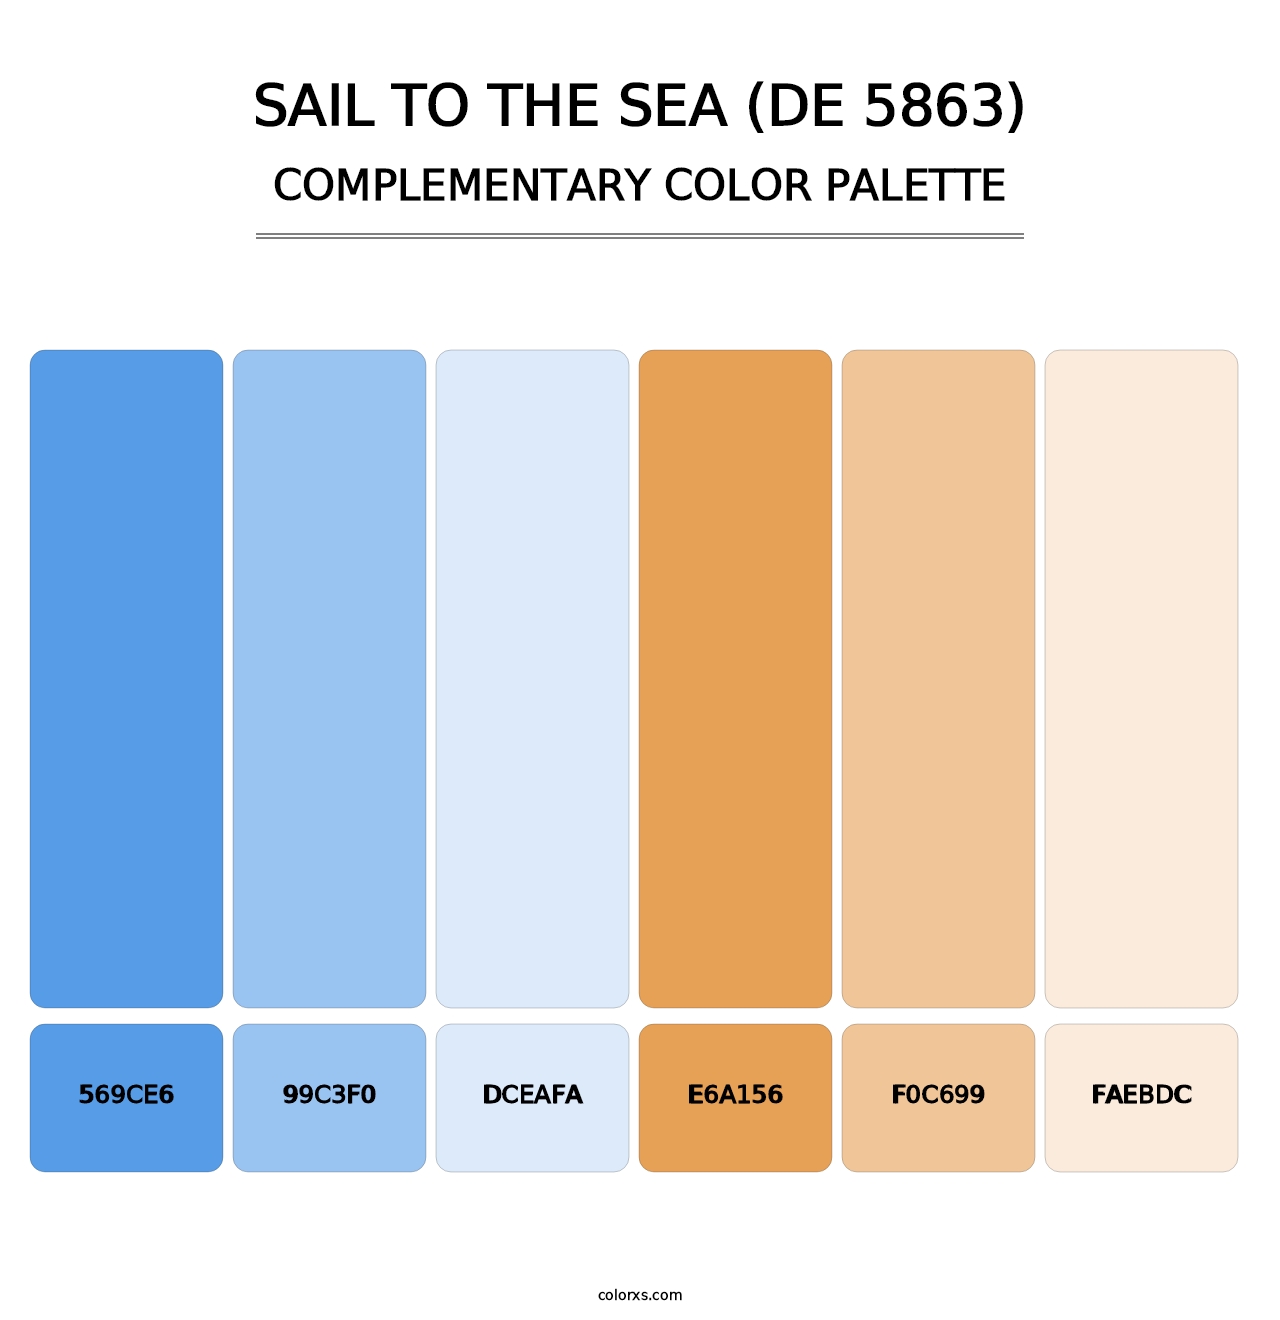 Sail to the Sea (DE 5863) - Complementary Color Palette